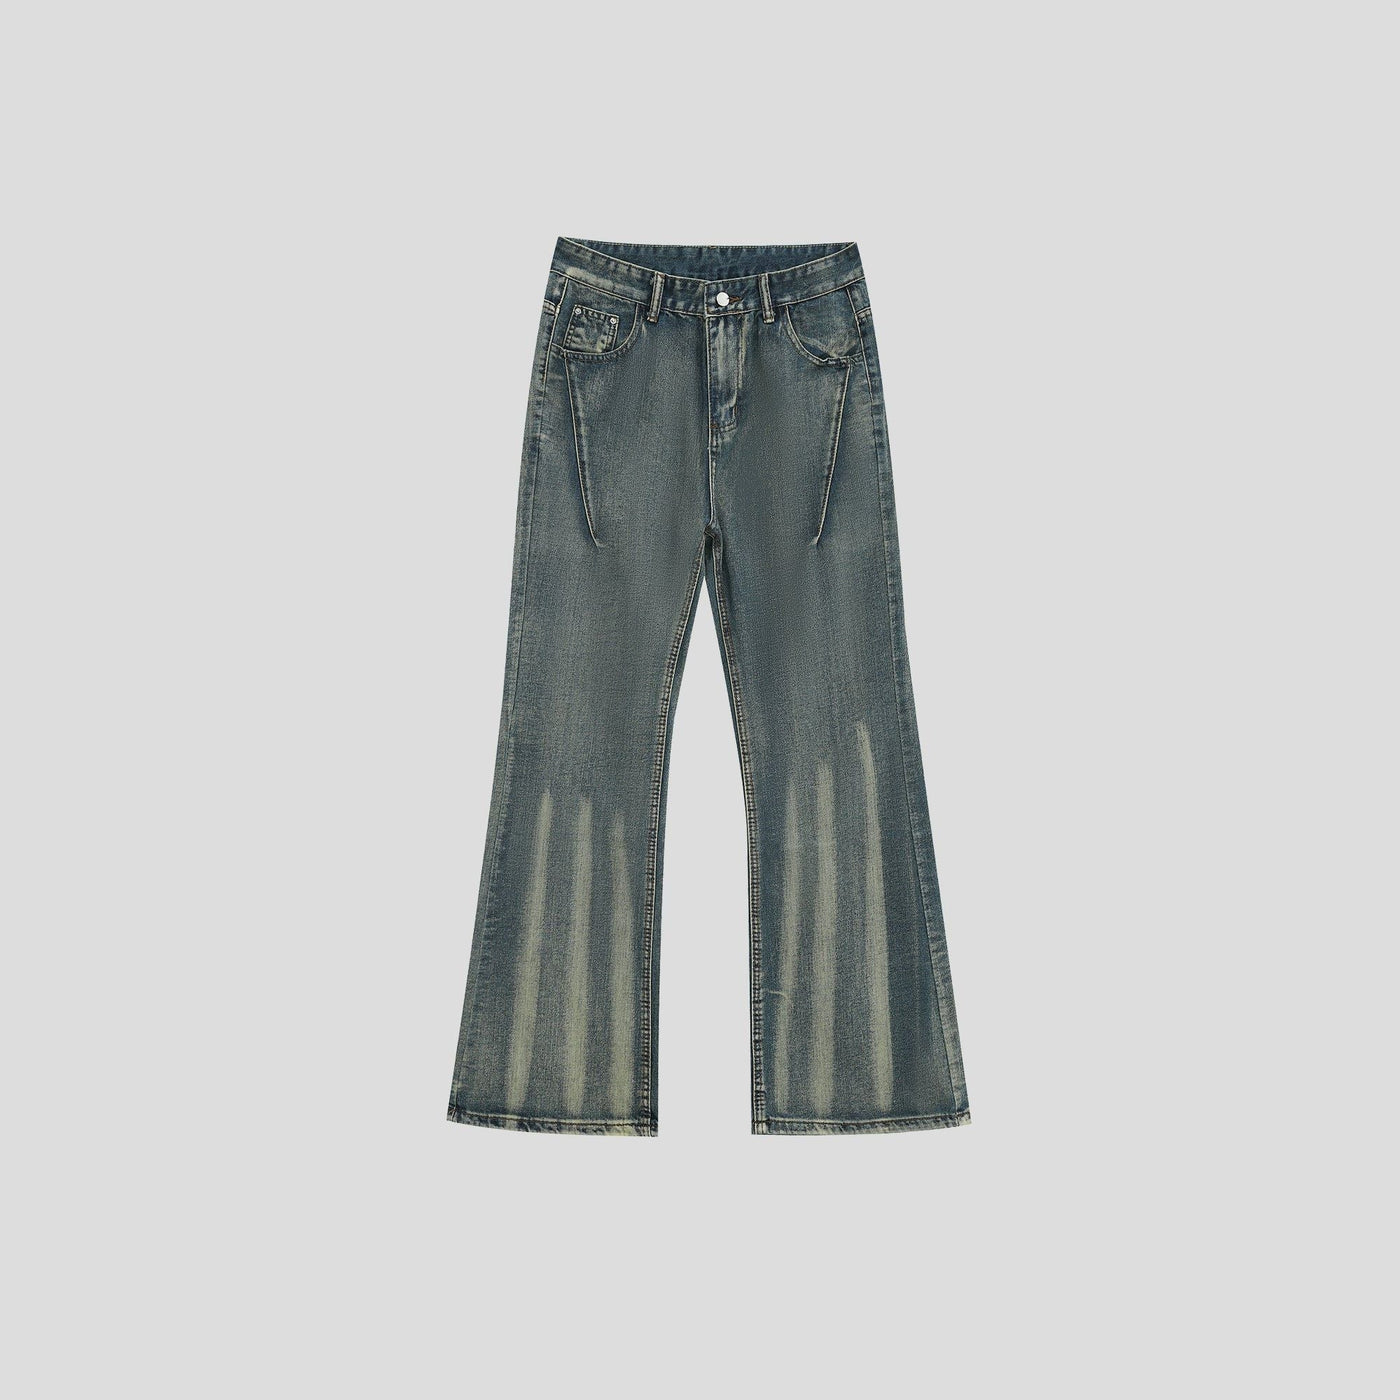 Fade End Lines Jeans Korean Street Fashion Jeans By INS Korea Shop Online at OH Vault